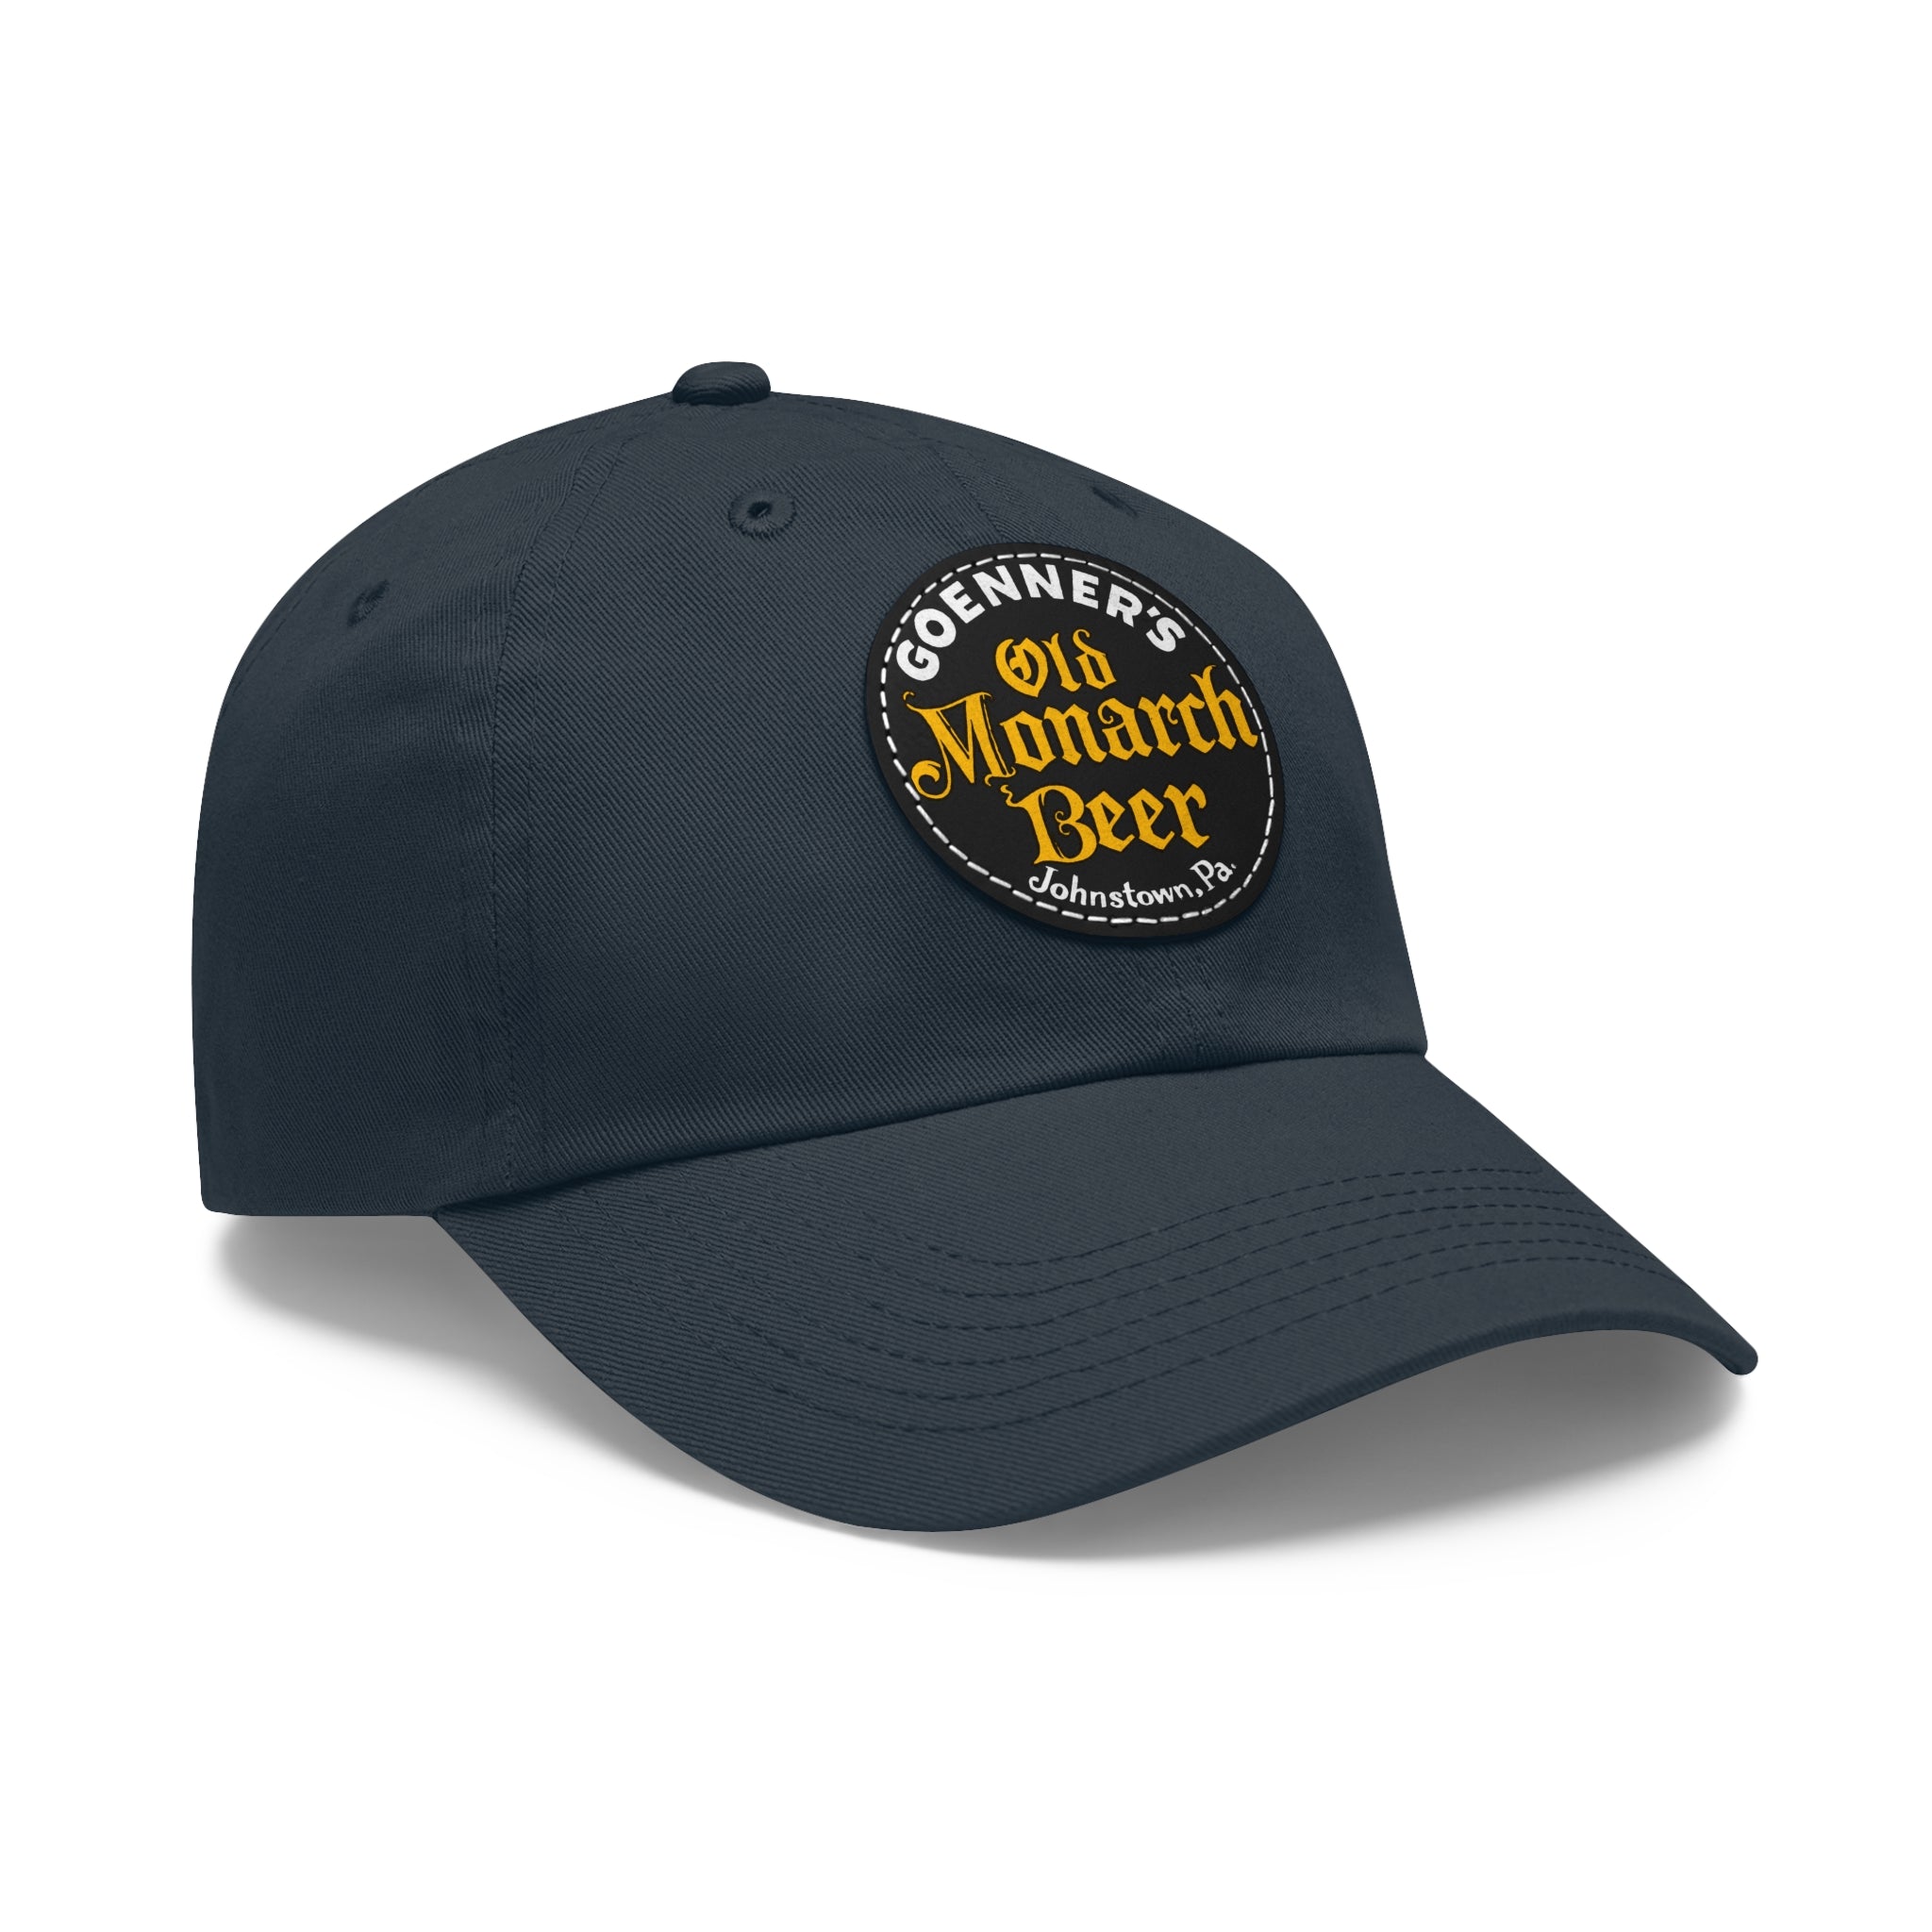 Goenner's Old Monarch Beer - Johnstown,PA - Printed Patch Dad Hat - Yinzylvania